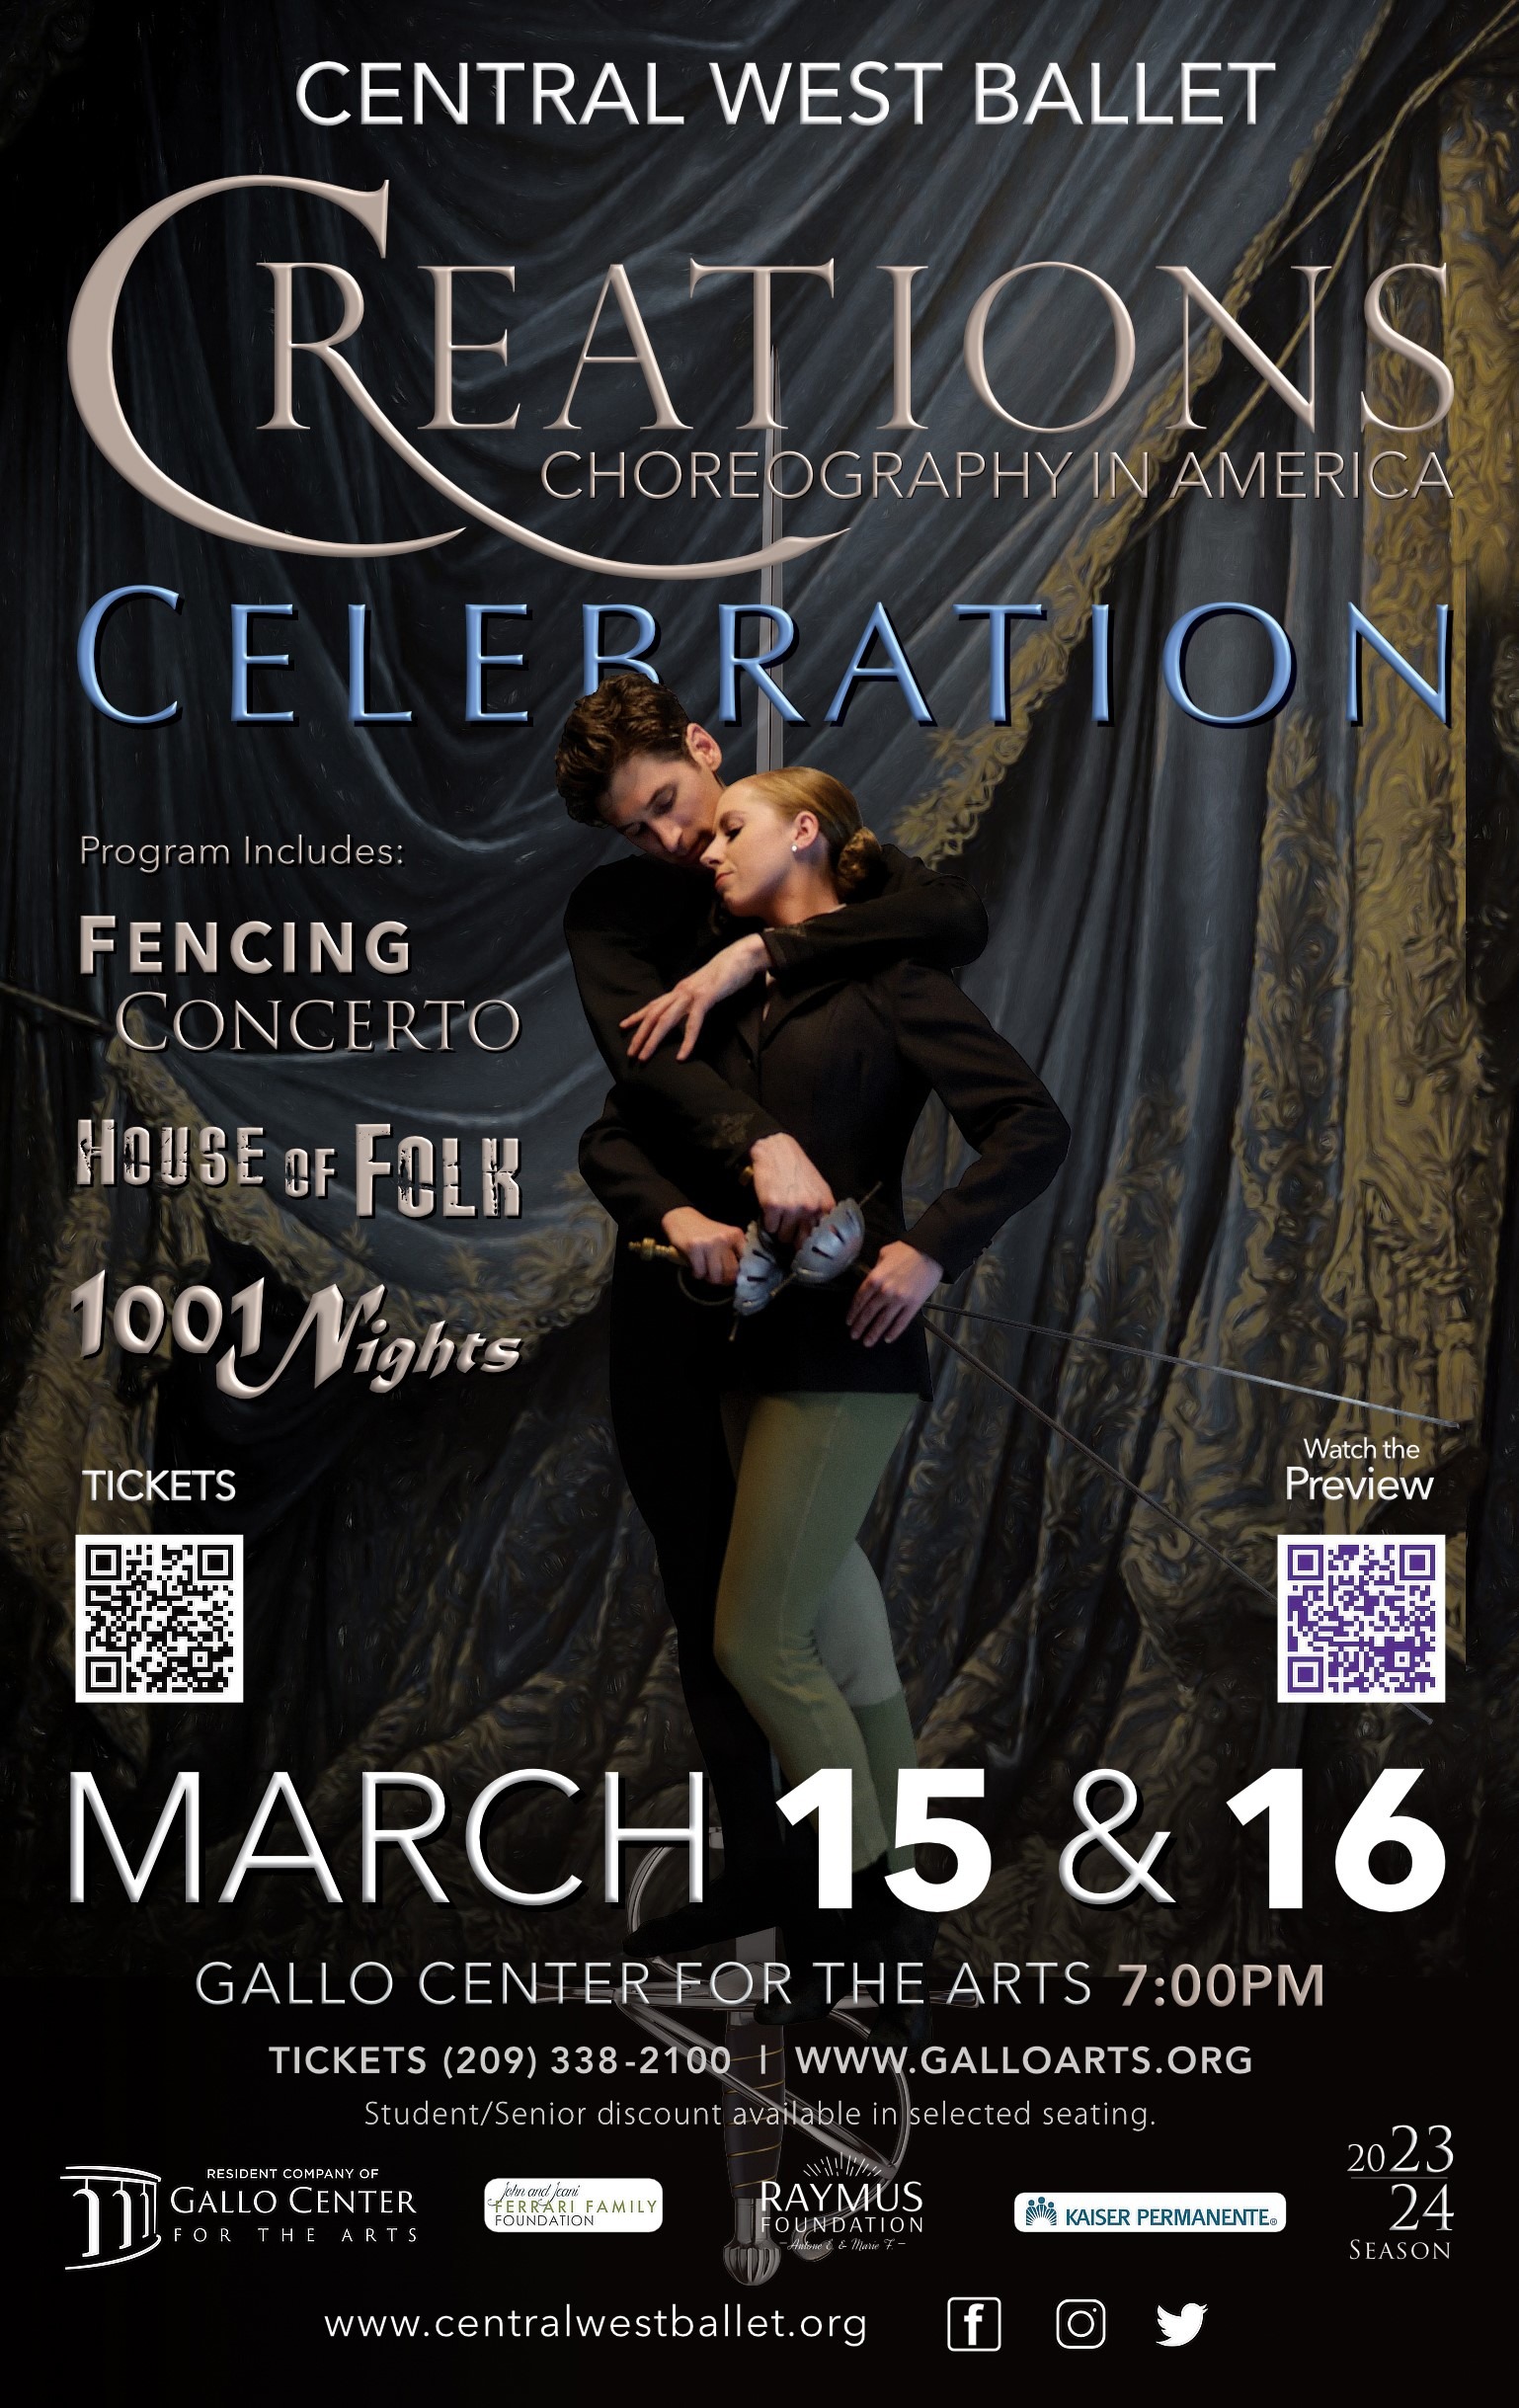 Central West Ballet presents ‘Creations-Choreography In America’